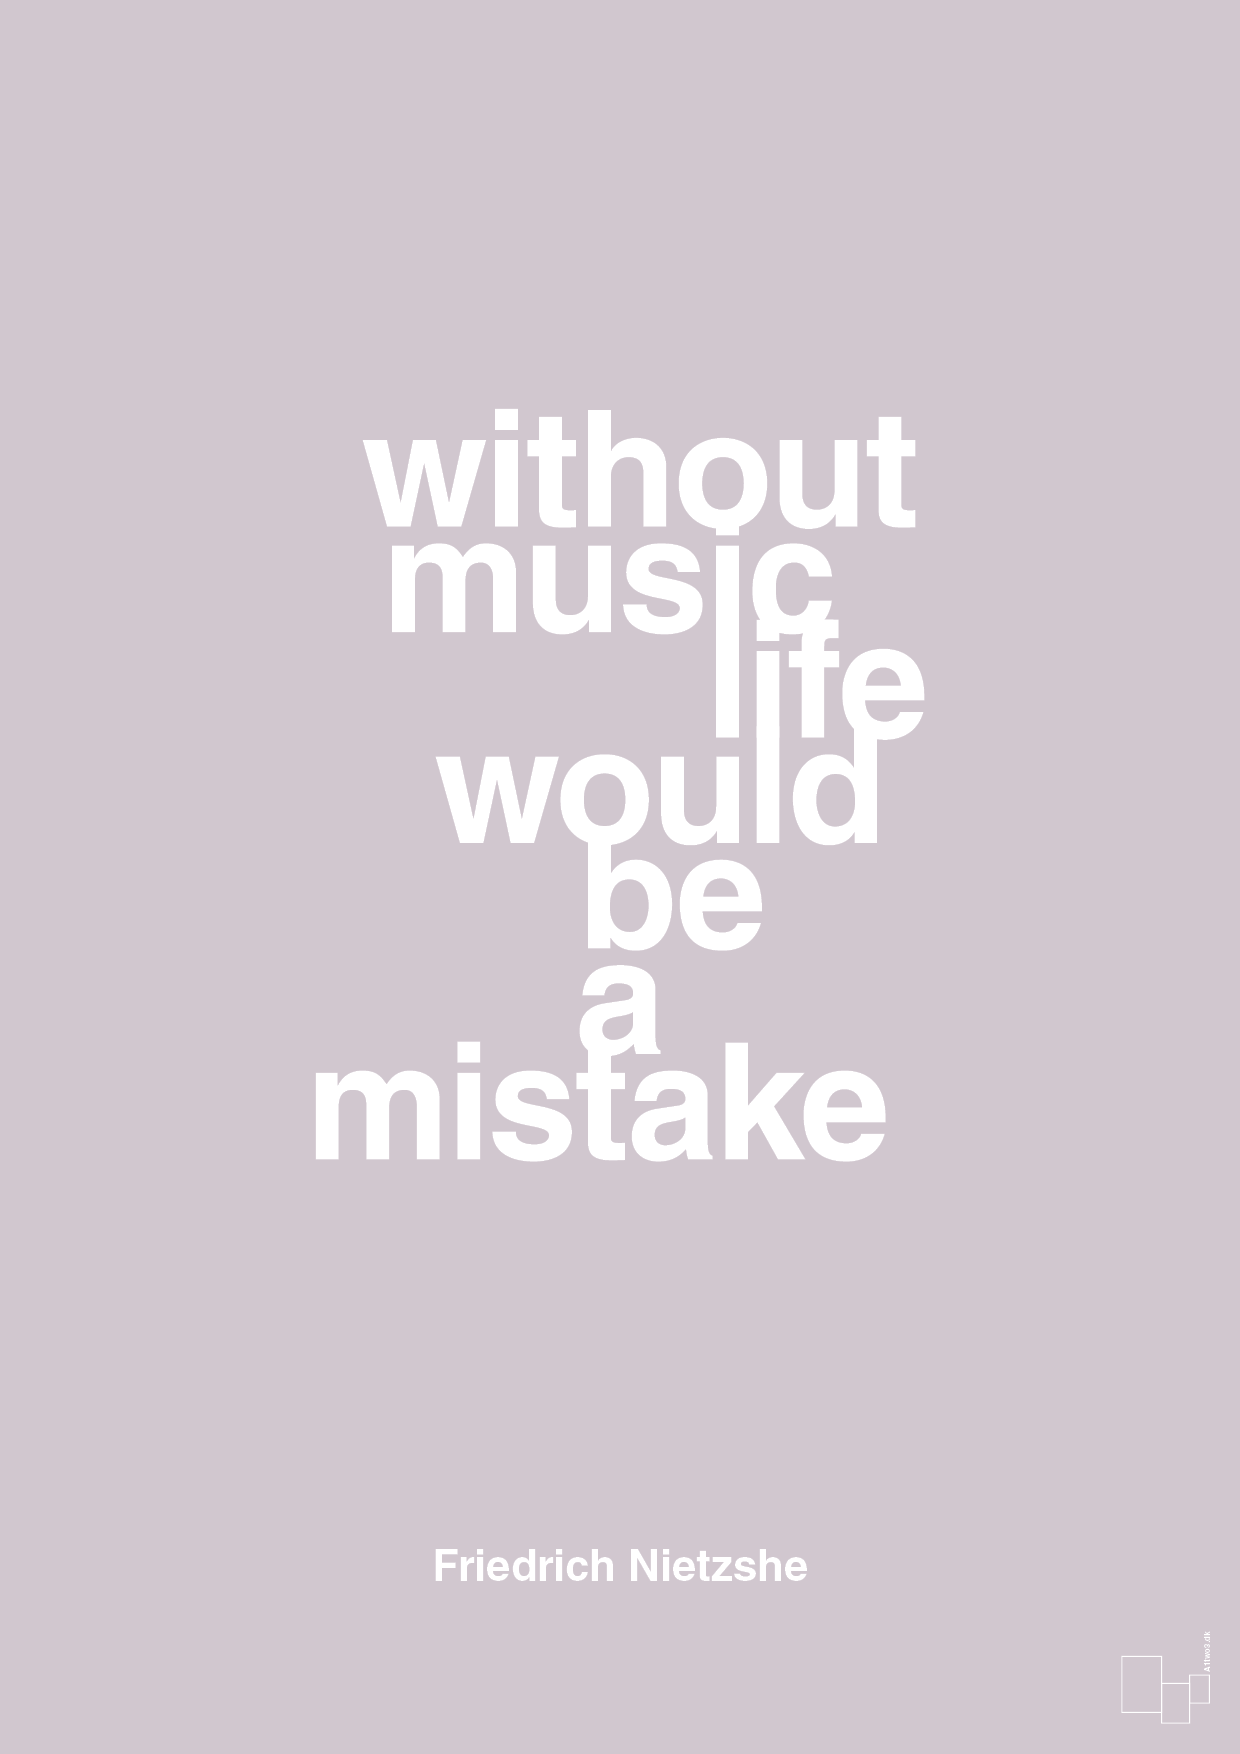 without music life would be a mistake - Plakat med Citater i Dusty Lilac